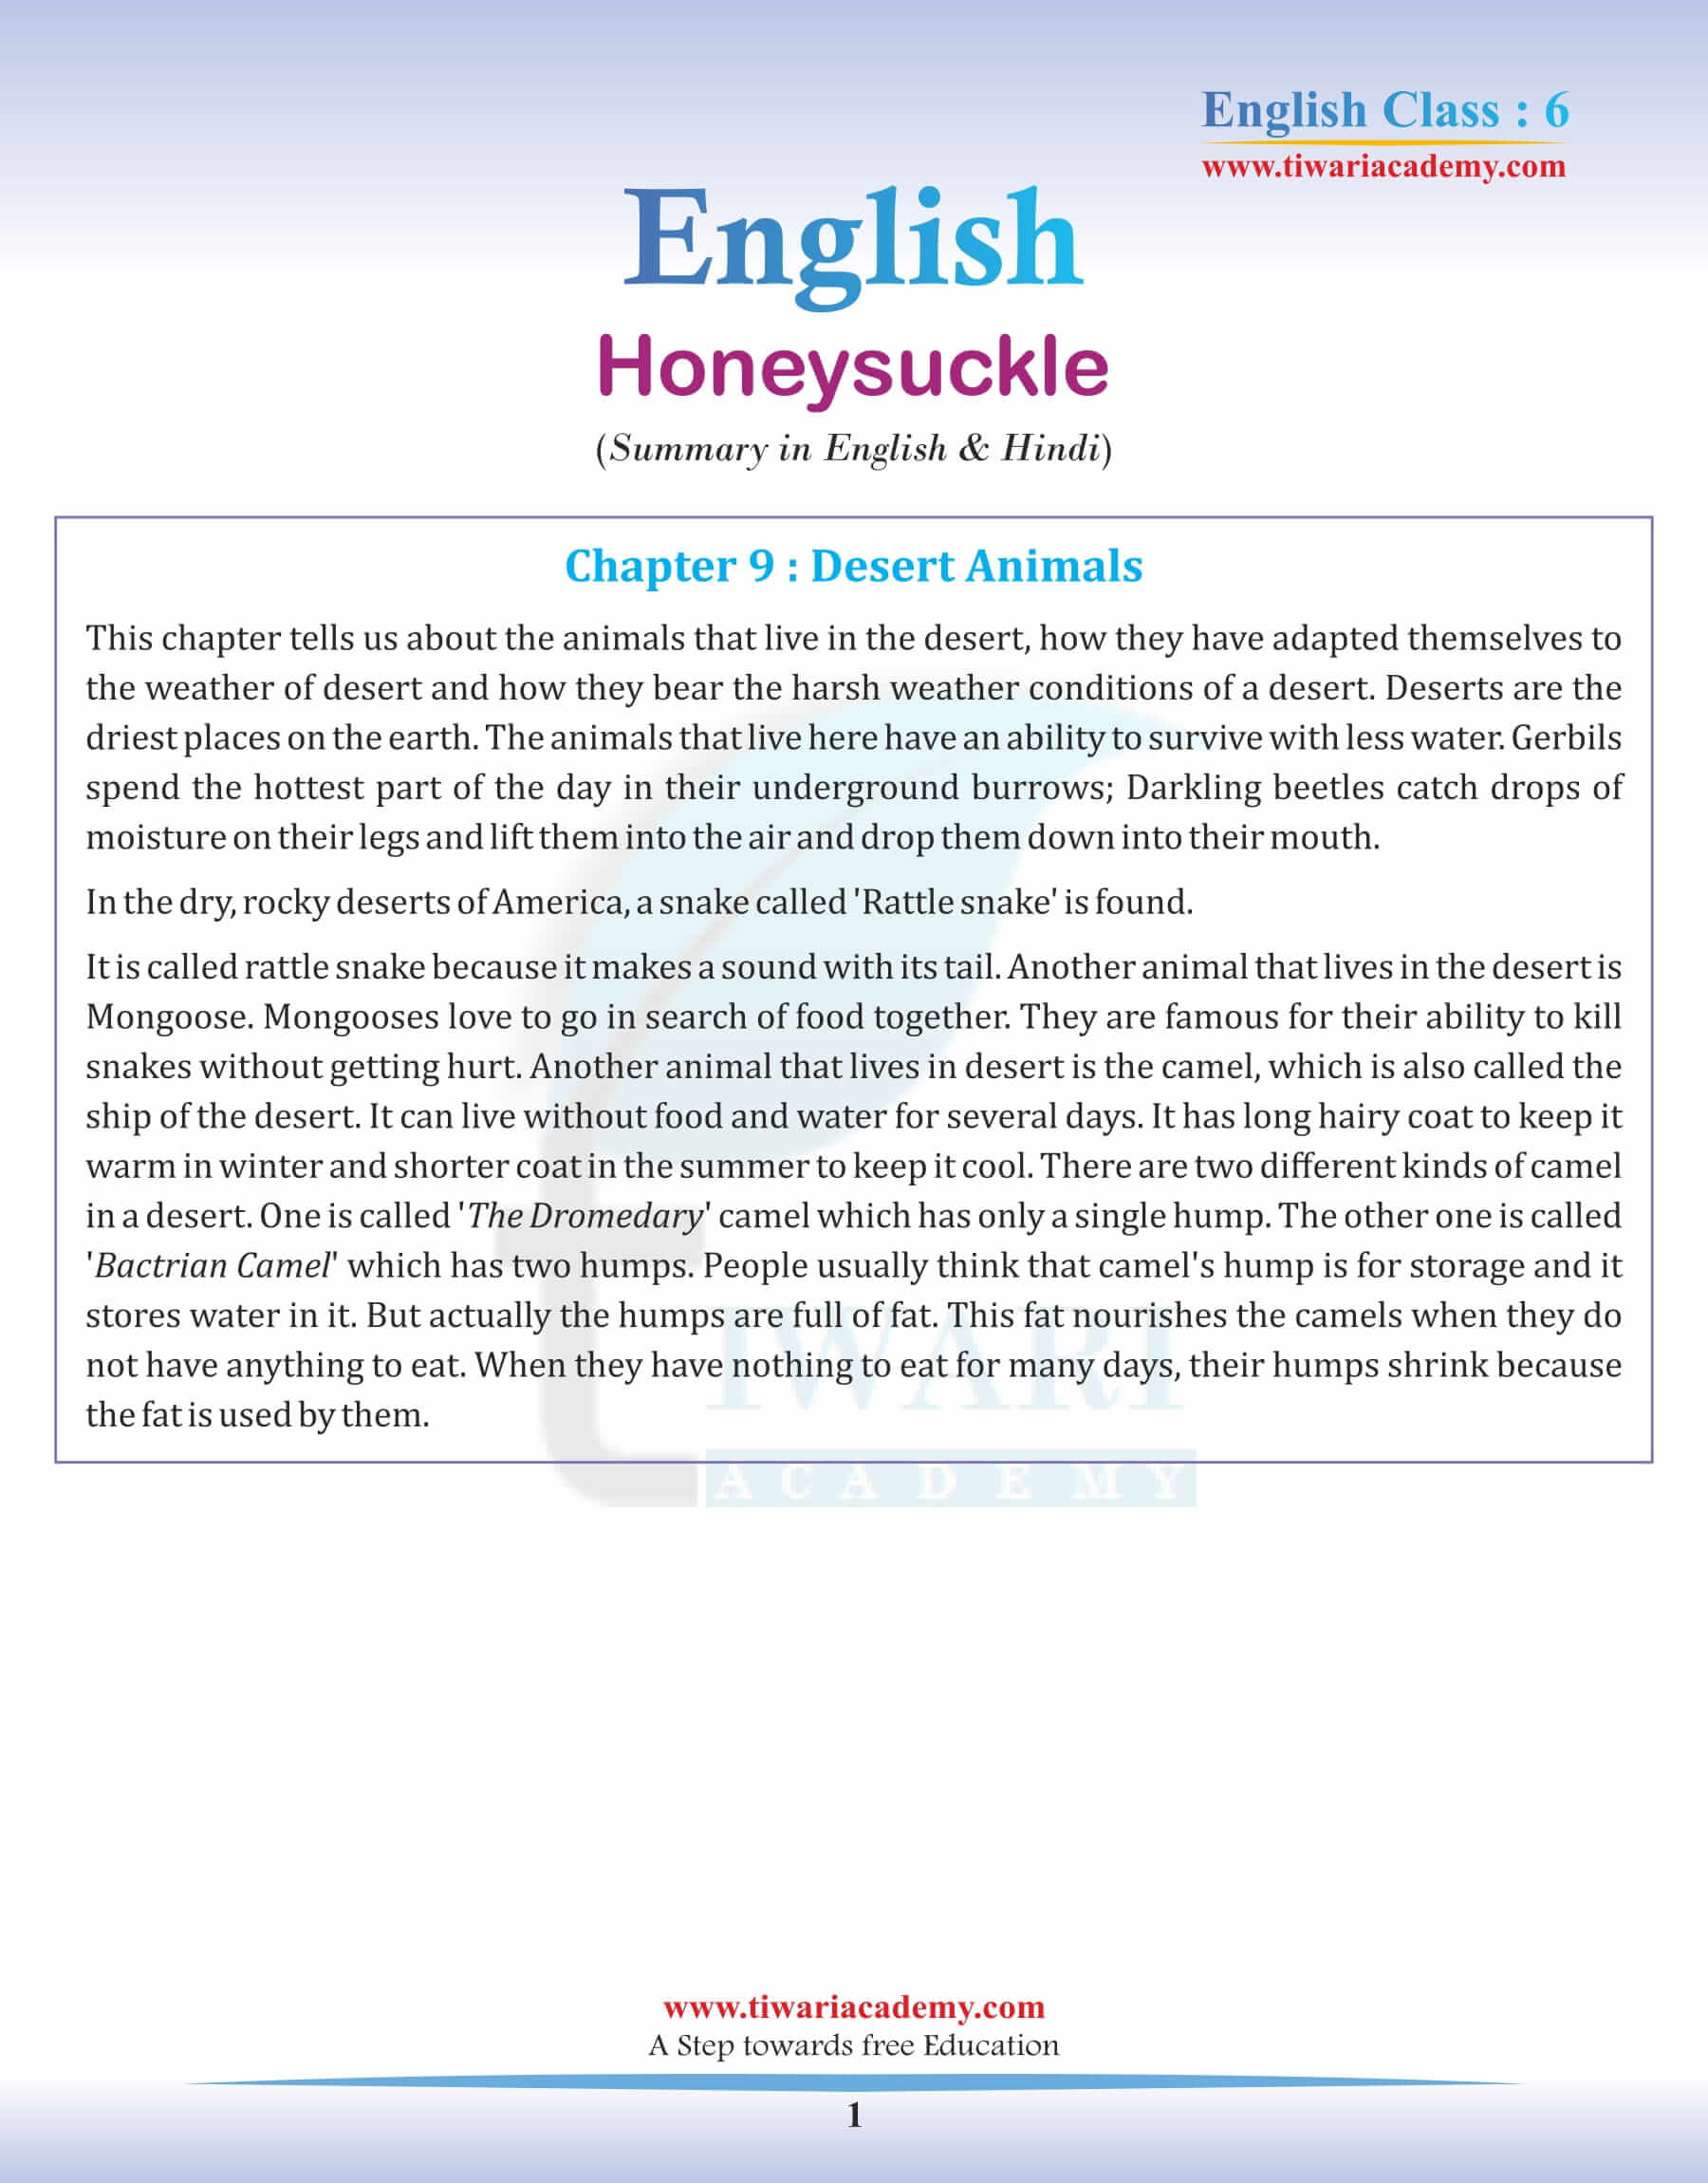 Class 6 English Chapter 9 Summary in English